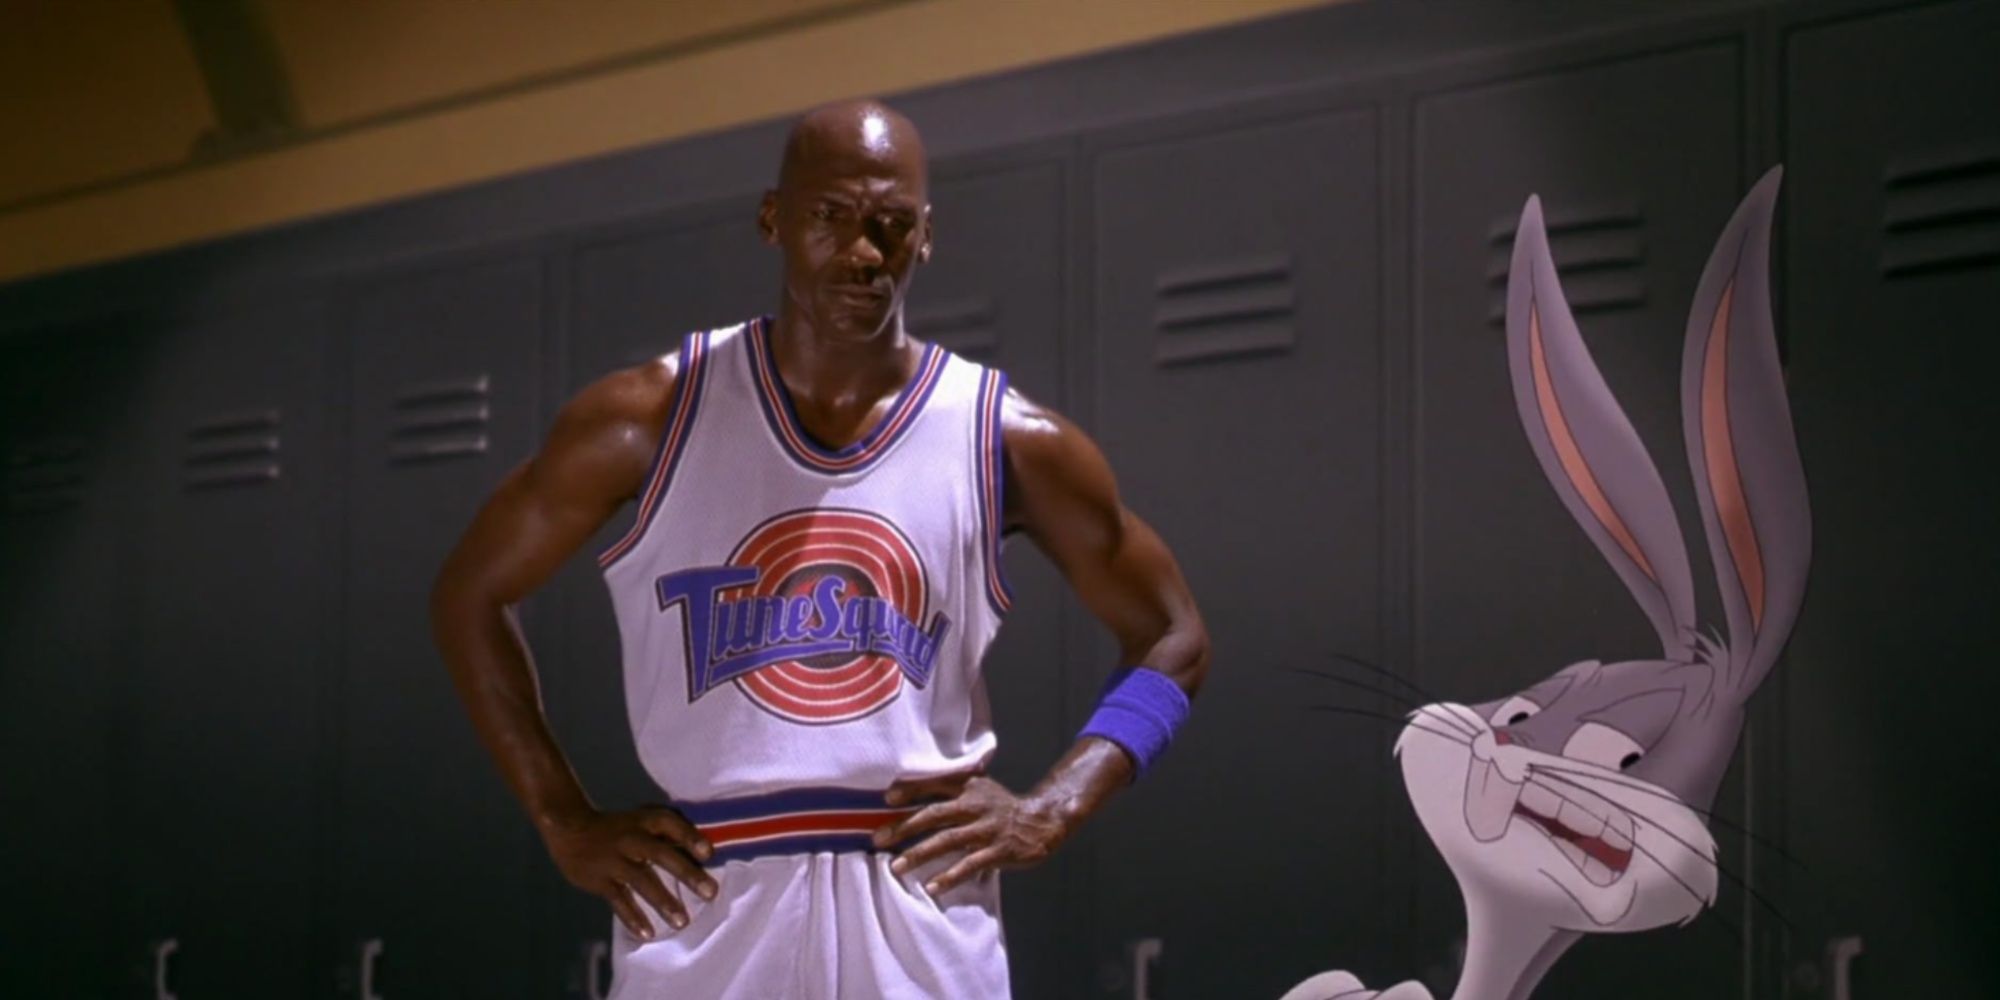 Michael Jordan in his TuneSquad uniform with his arms on his hips looking over at Bugs Bunny in the locker room.